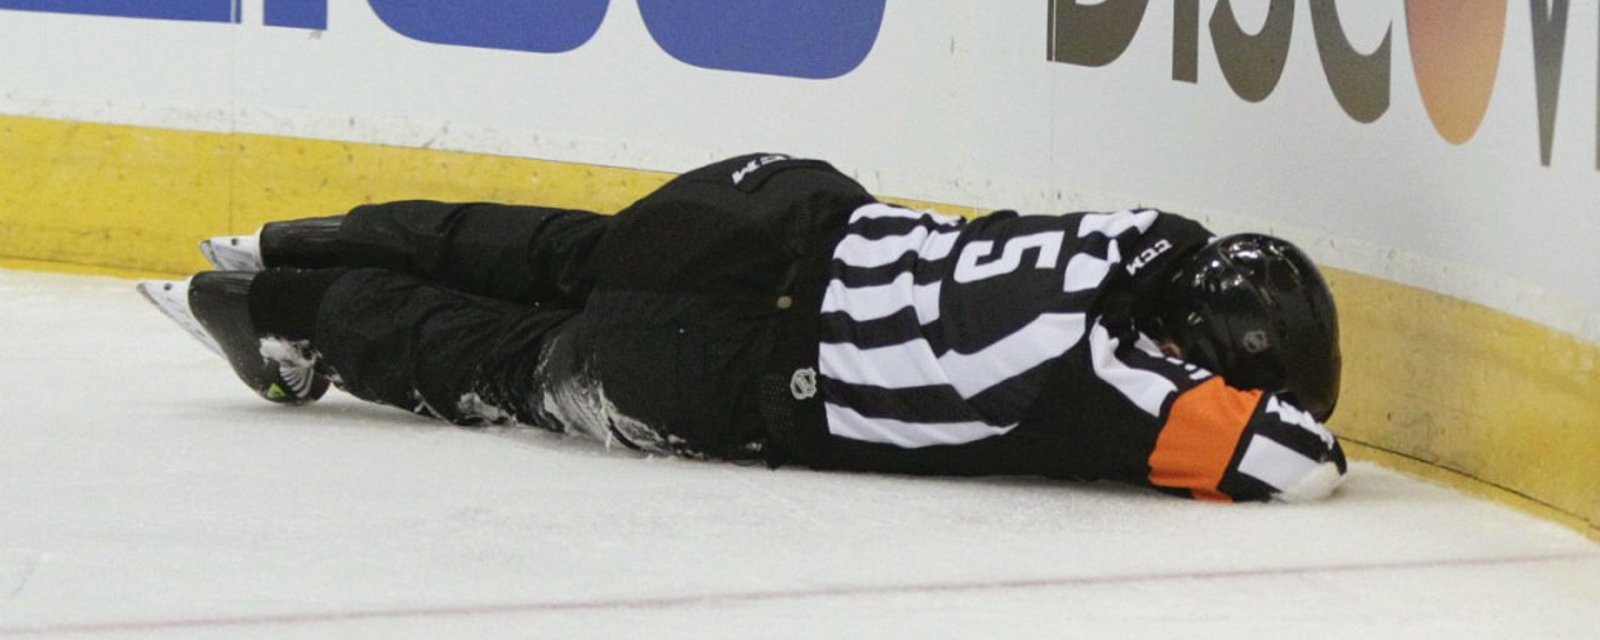 Referee takes deflected slap shot to the face during power-play